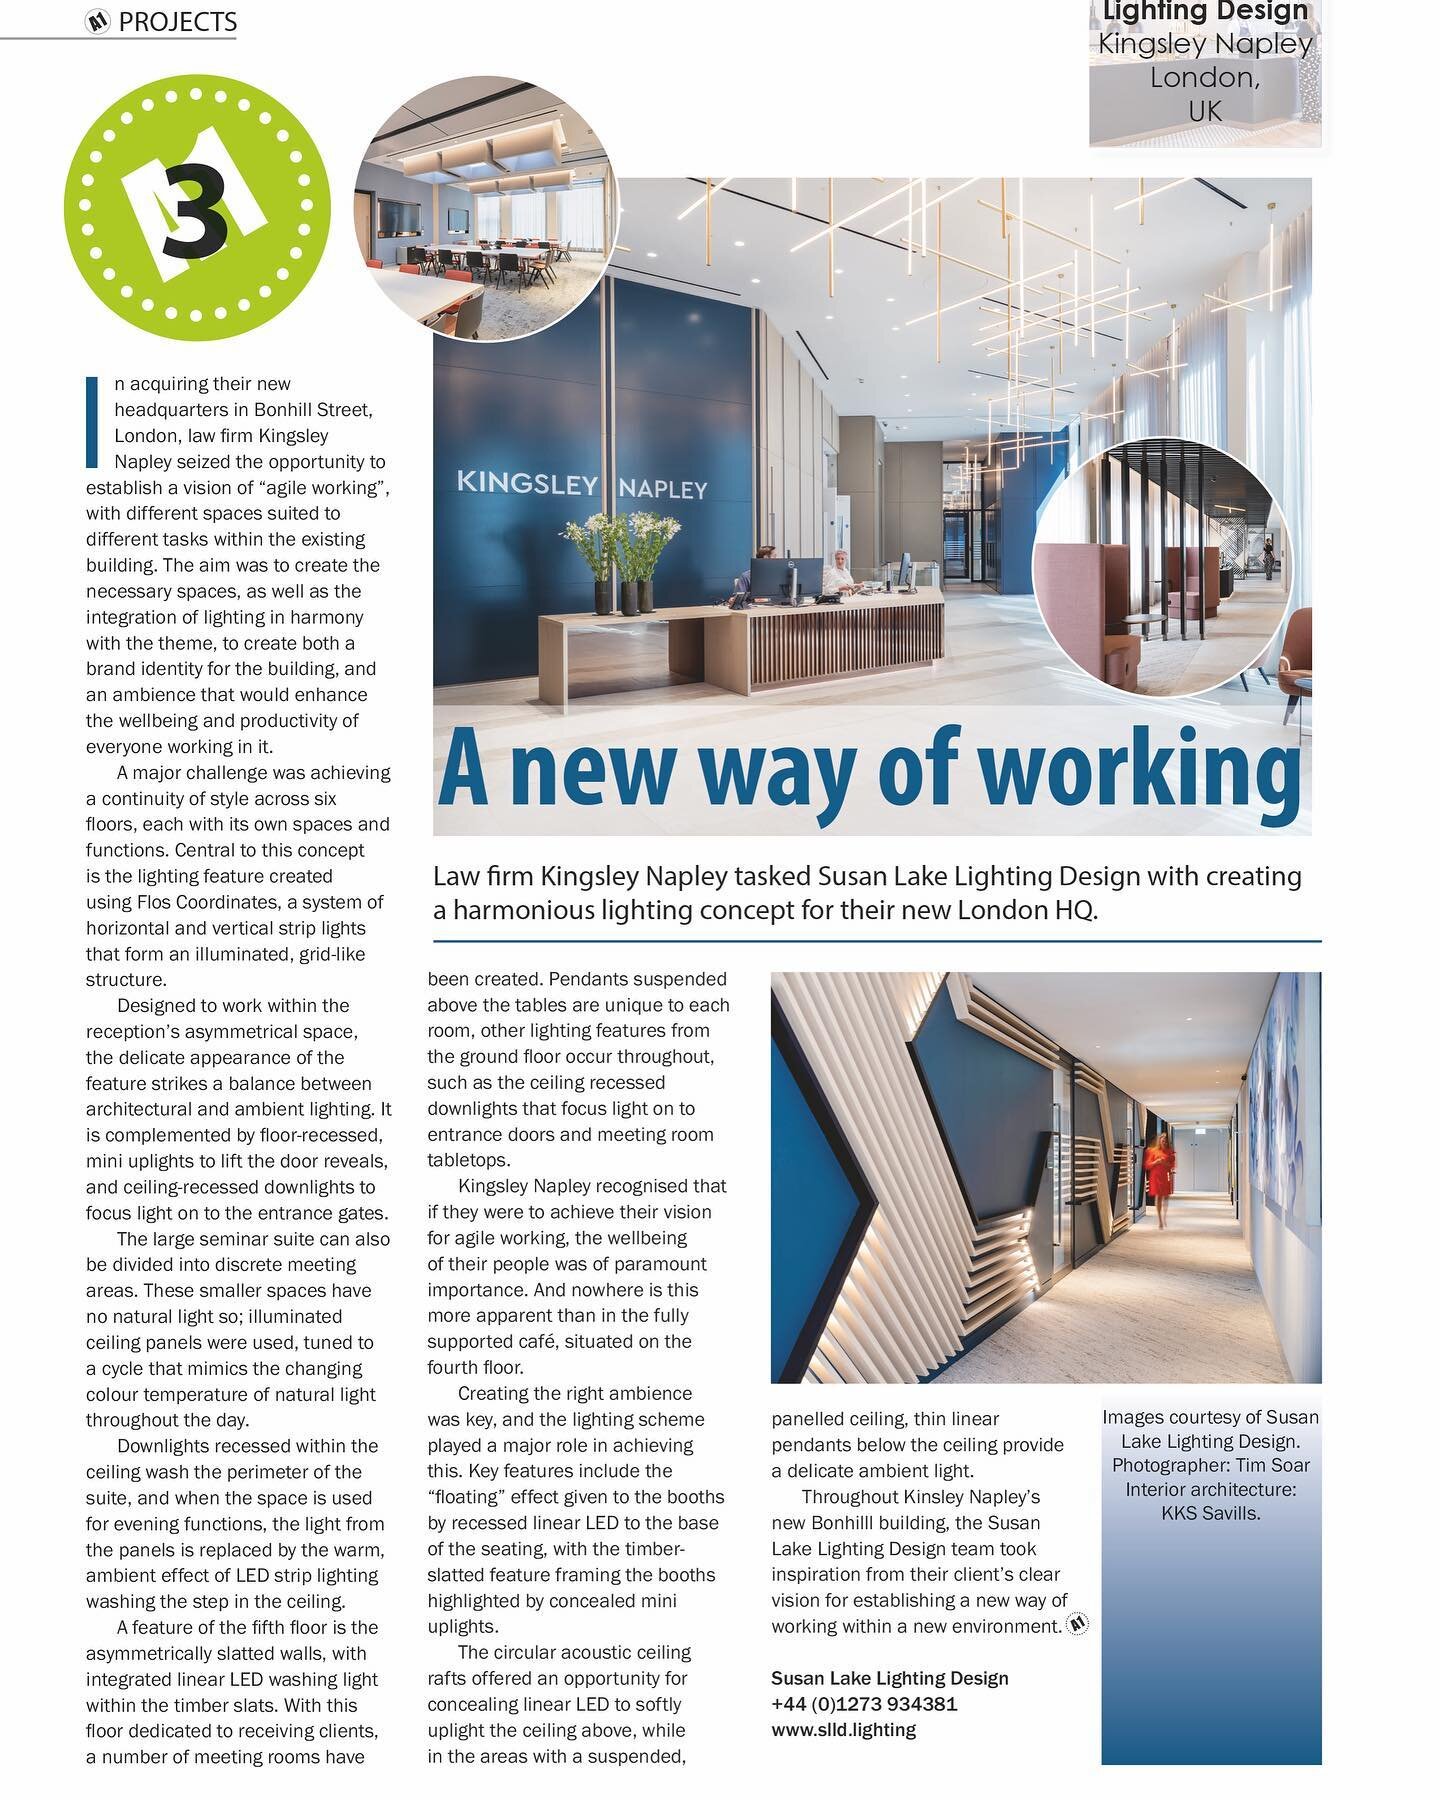 We&rsquo;re thrilled our lighting design project Kingsley Napley is featured in A1 Lighting Magazine&rsquo;s May 2022 issue. 
Thanks to the fantastic team involved that made the design possible including the design, construction and client! 
Lighting